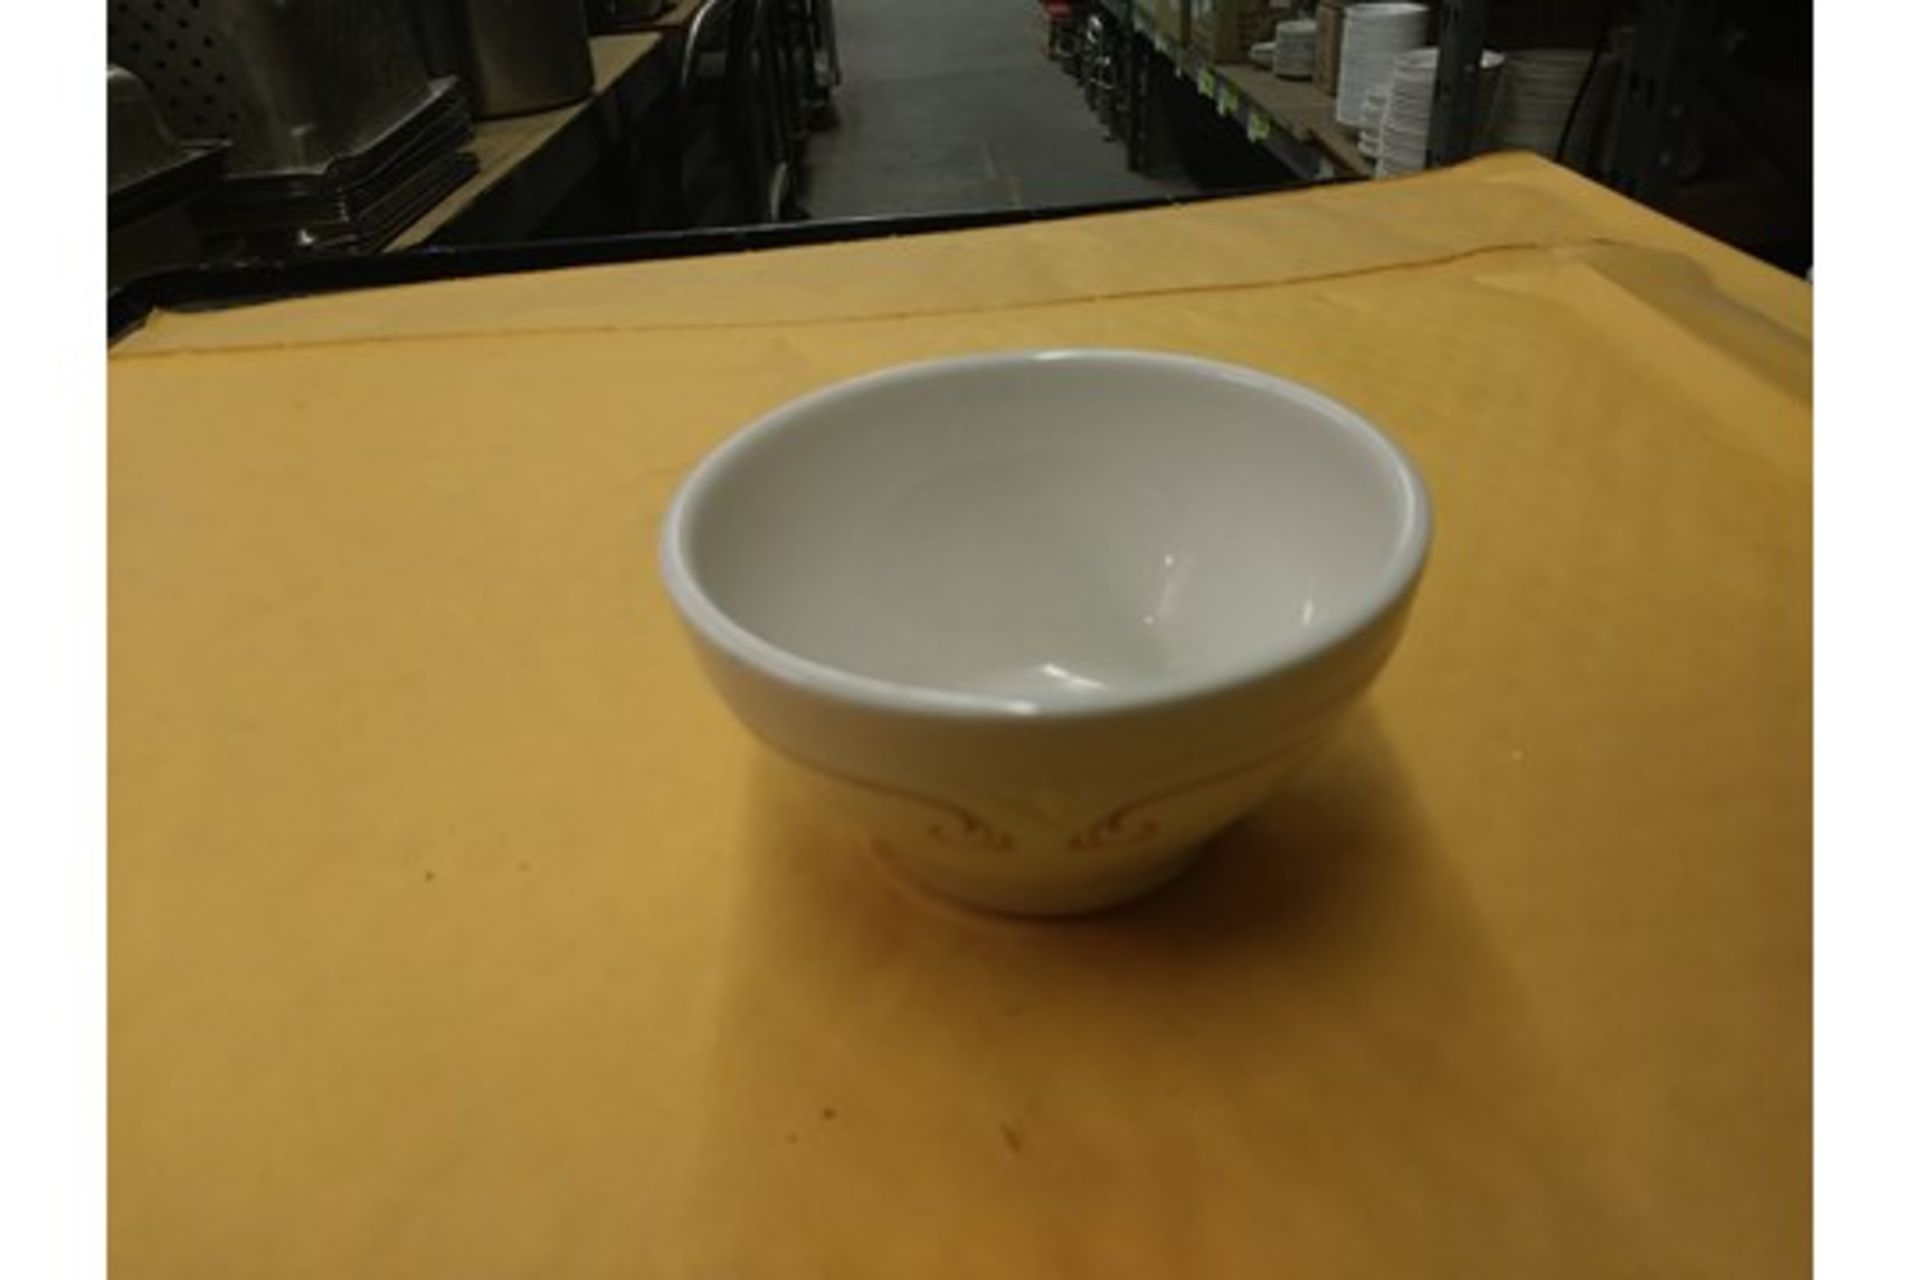 4" SYRACUSE DISH (31A) (includes approx QTY 84 in this lot)